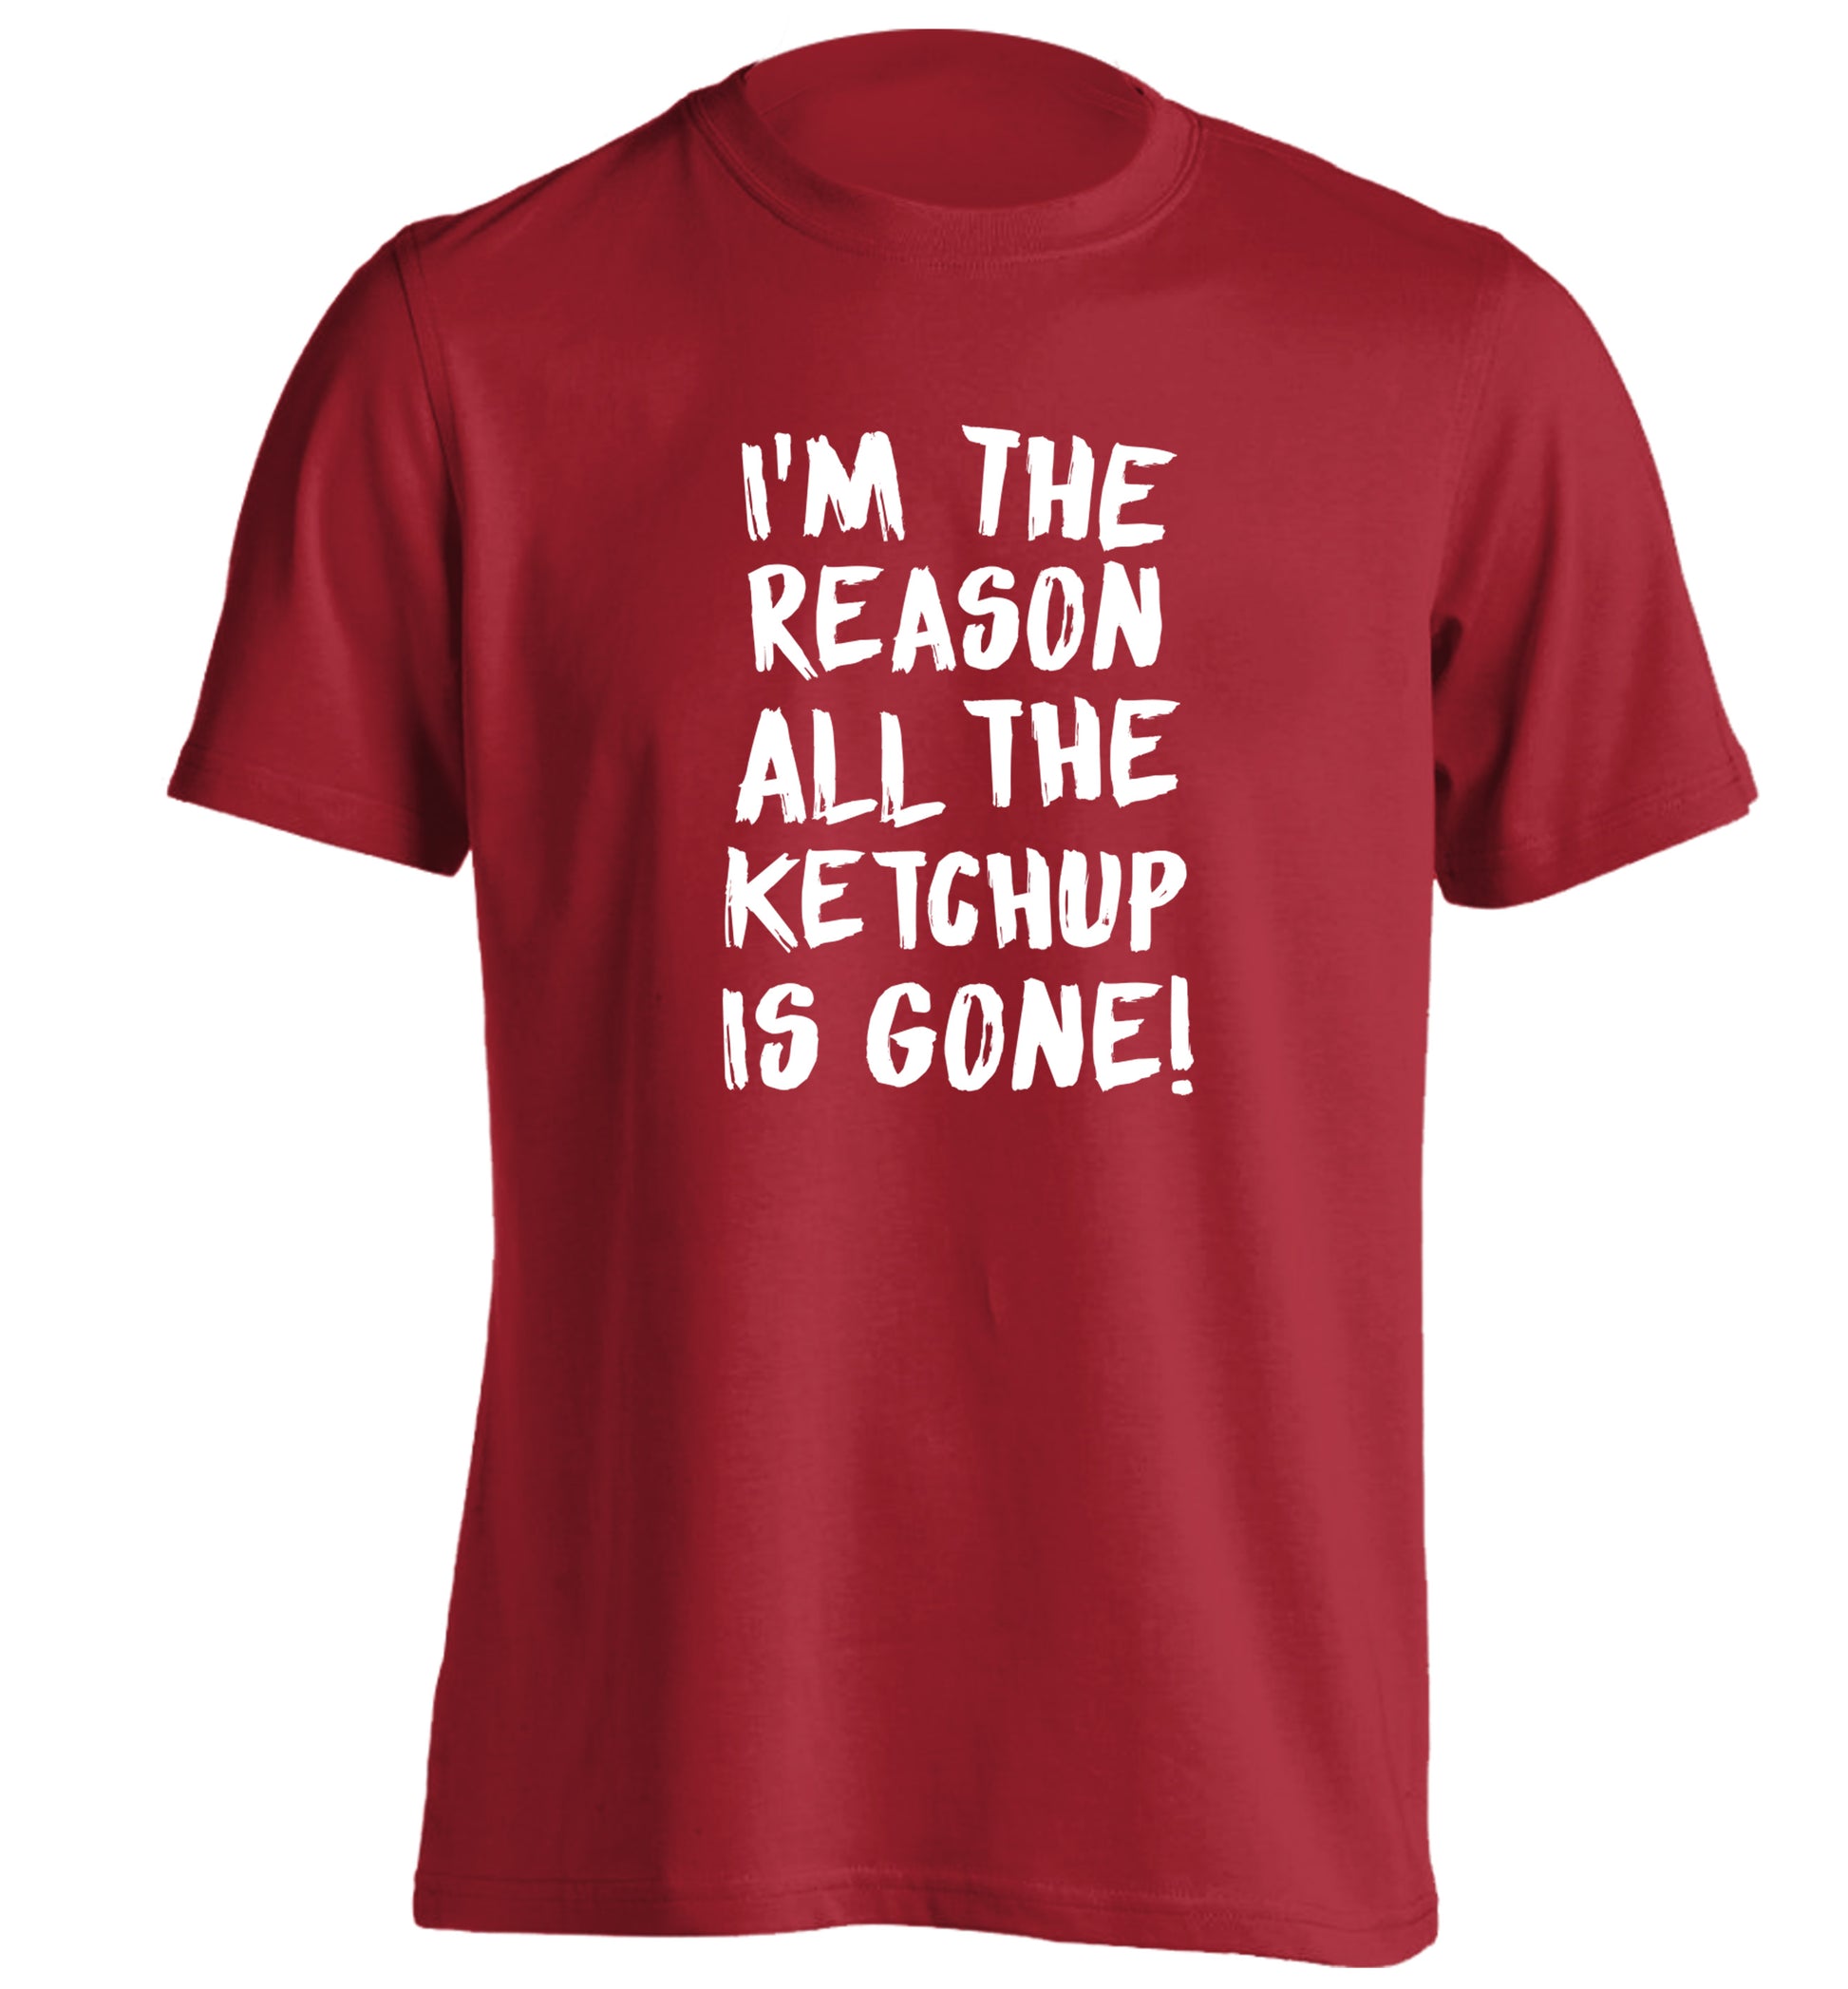 I'm the reason why all the ketchup is gone adults unisex red Tshirt 2XL